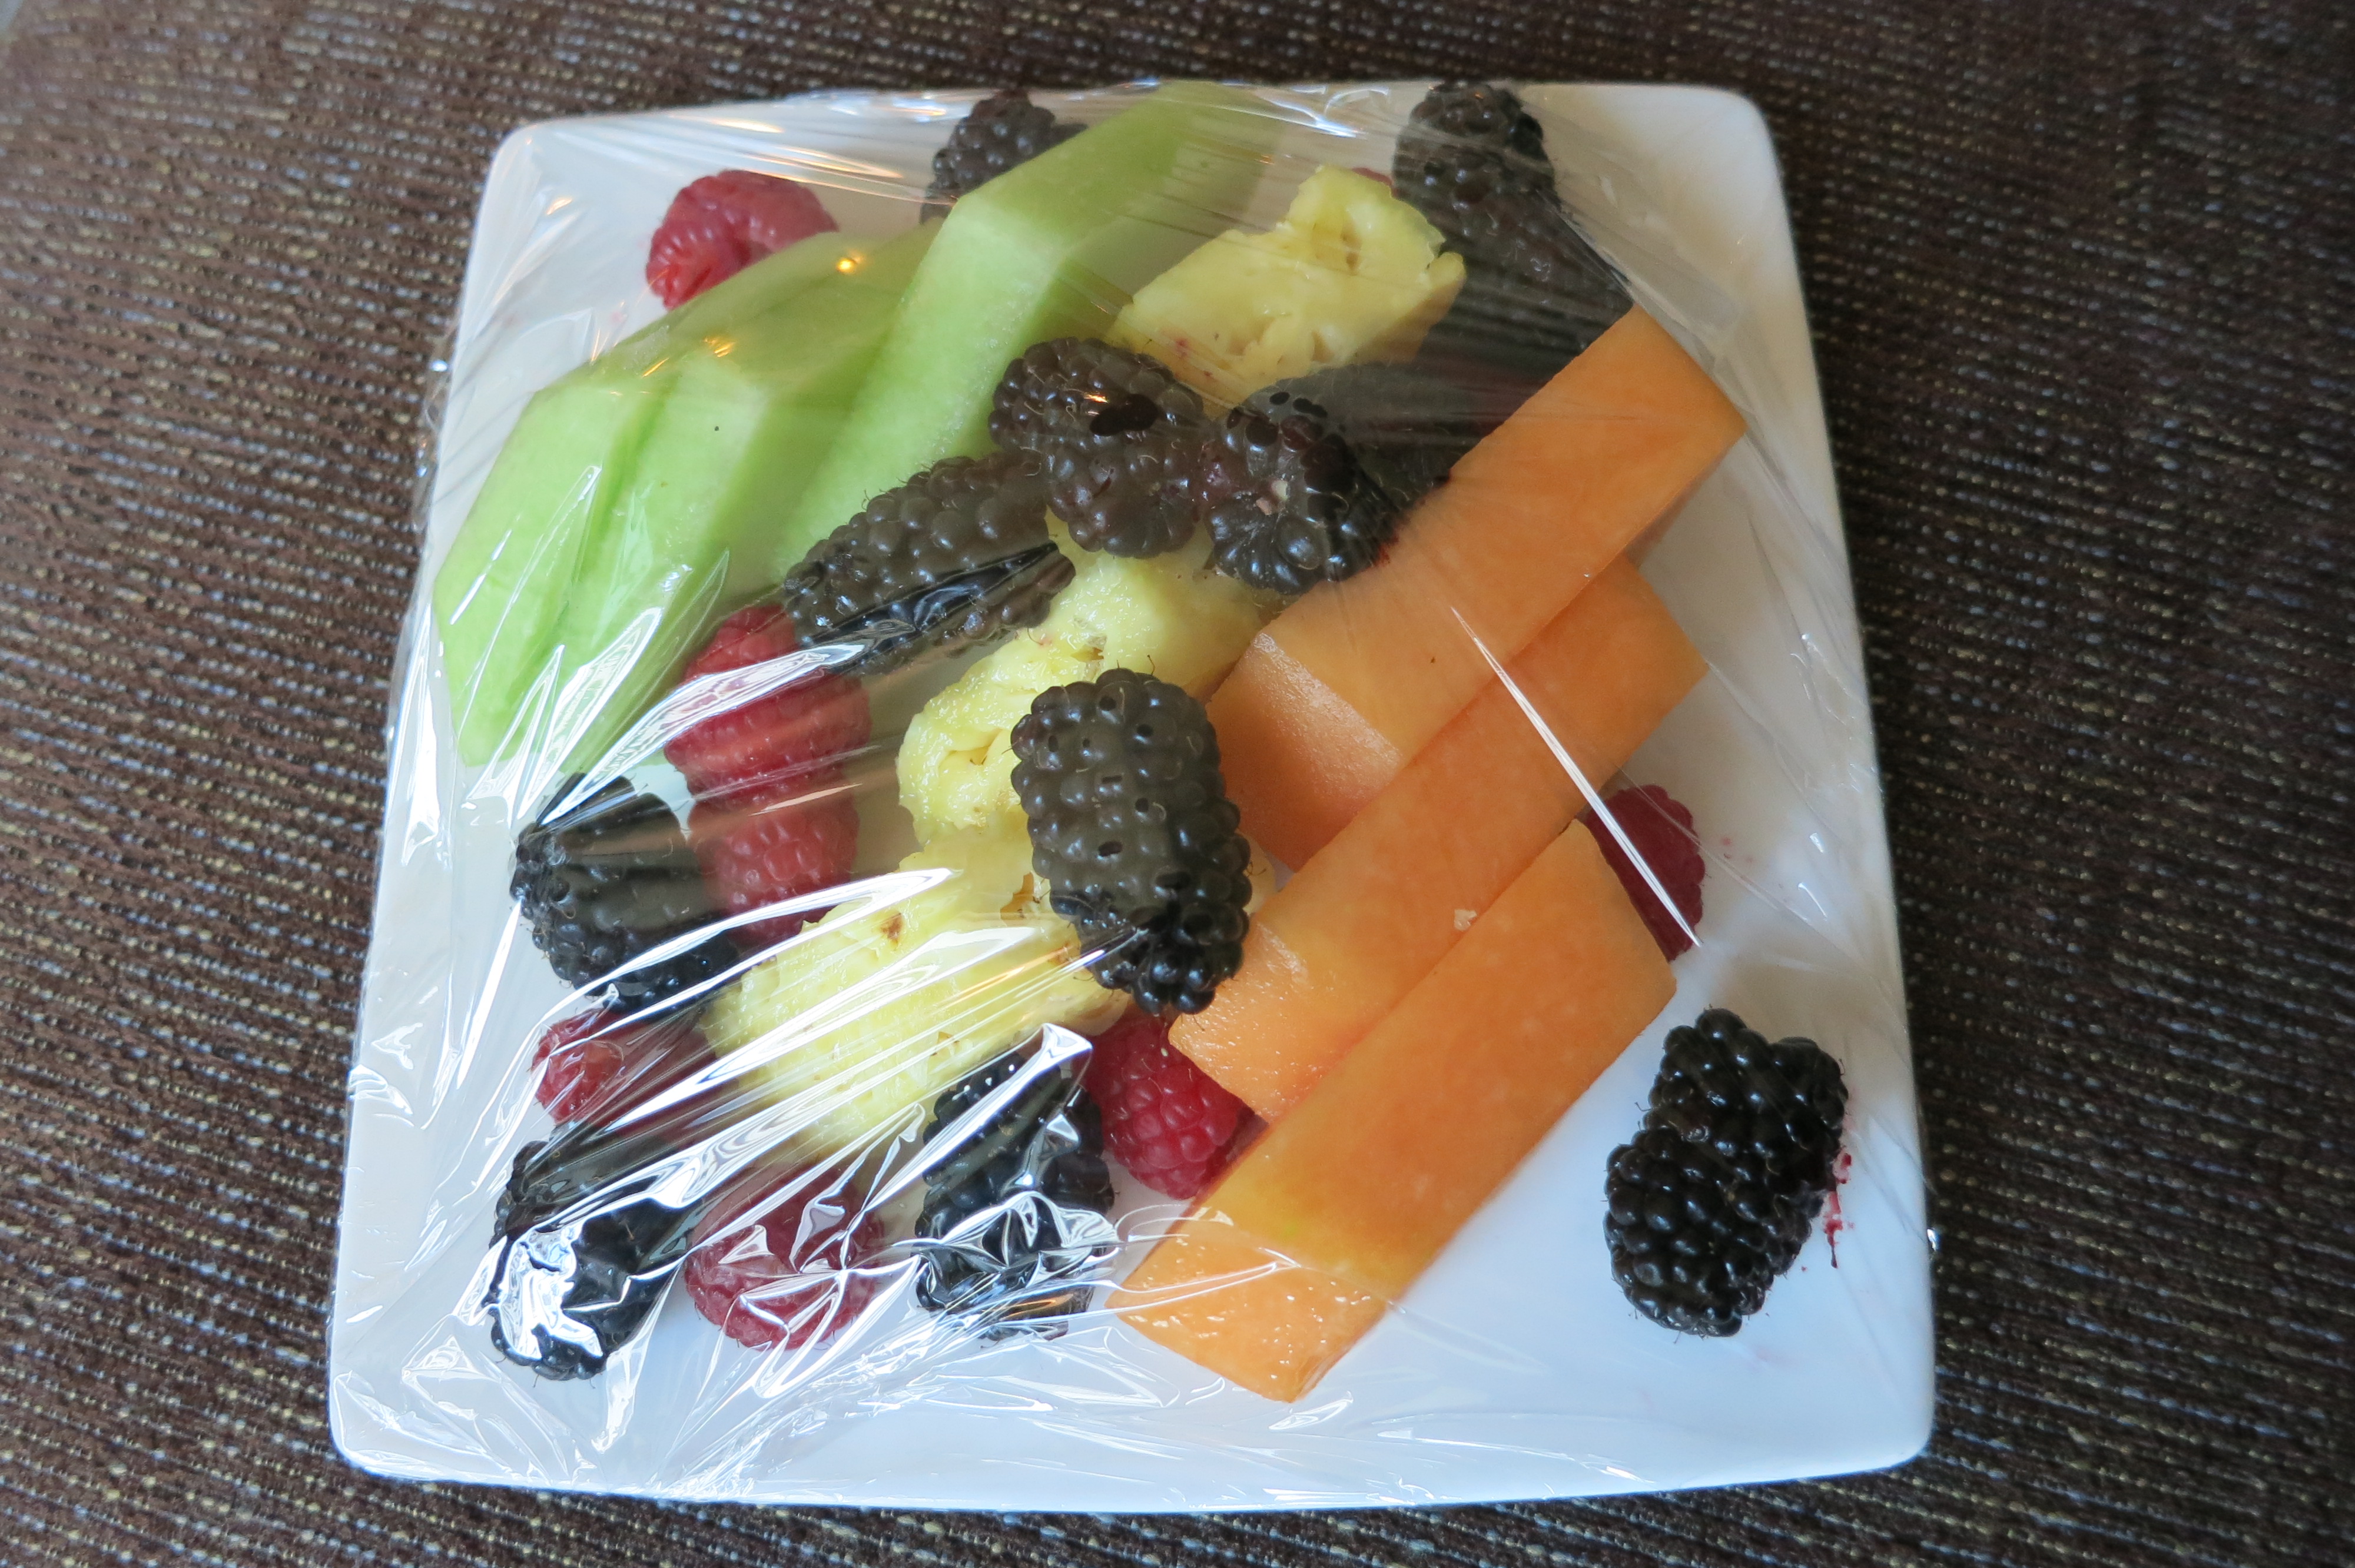 a plate of fruit wrapped in plastic